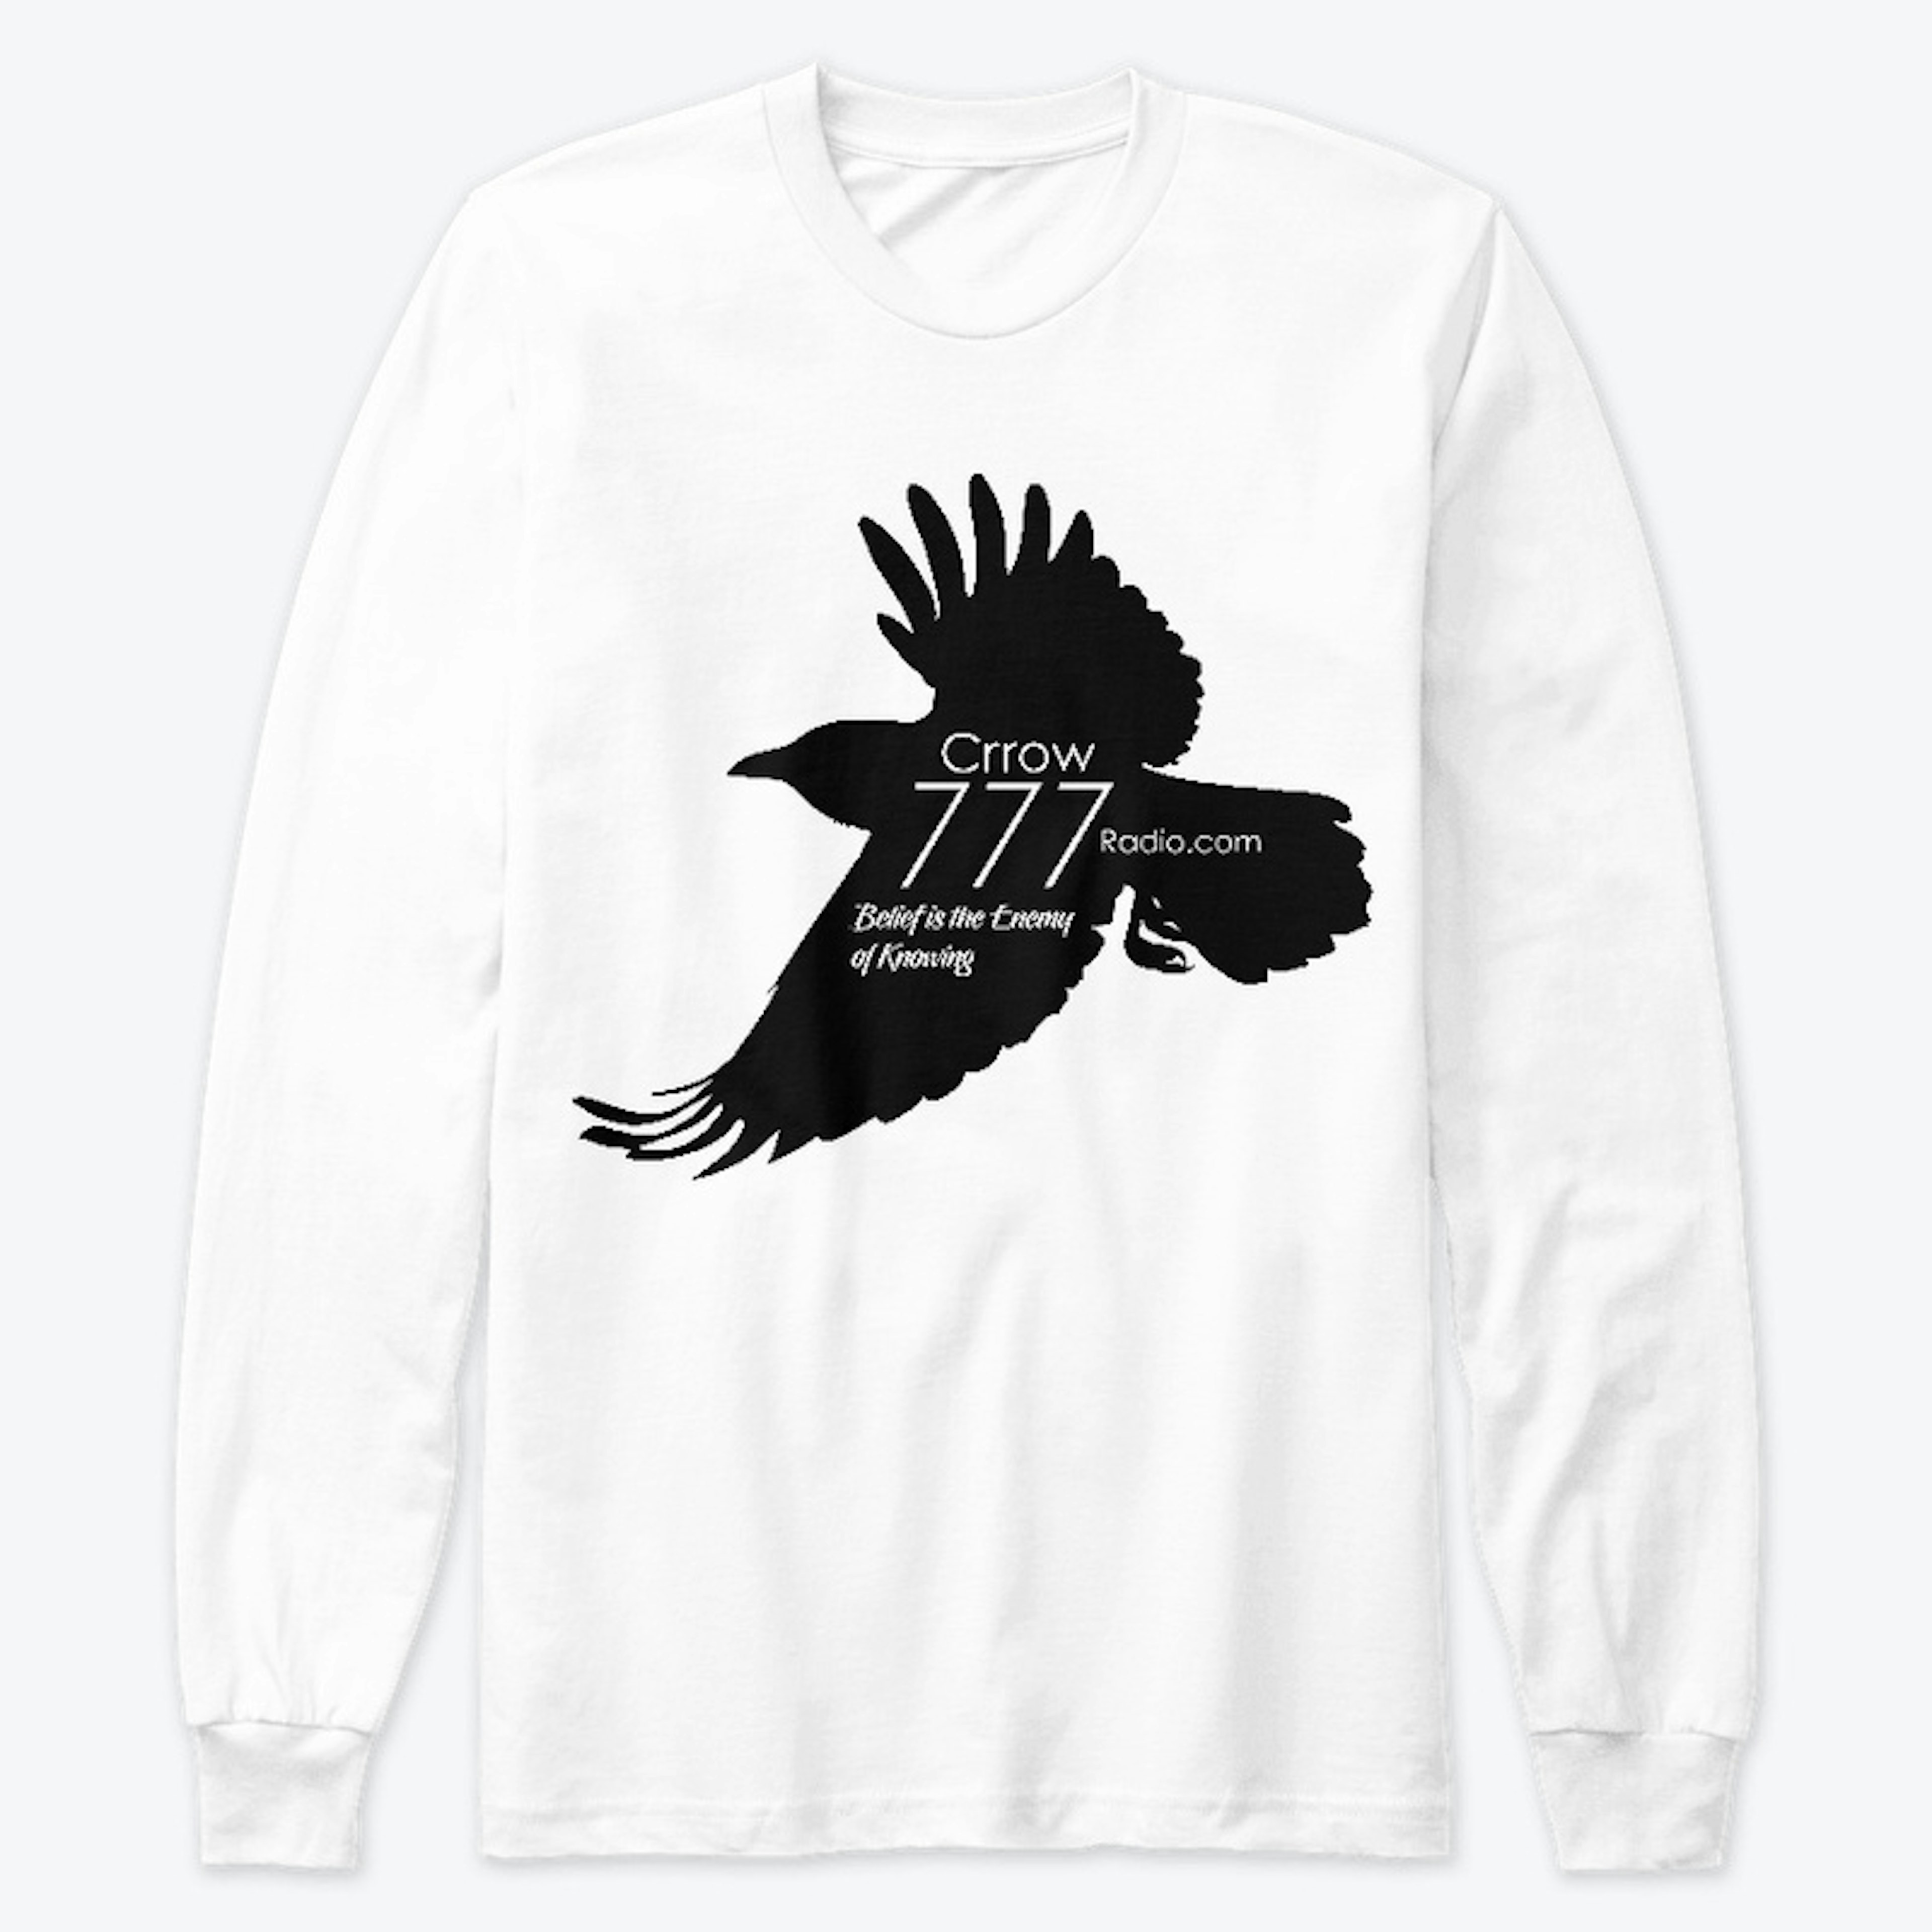 Crrow777 Long-sleeve Design 2 for Subs